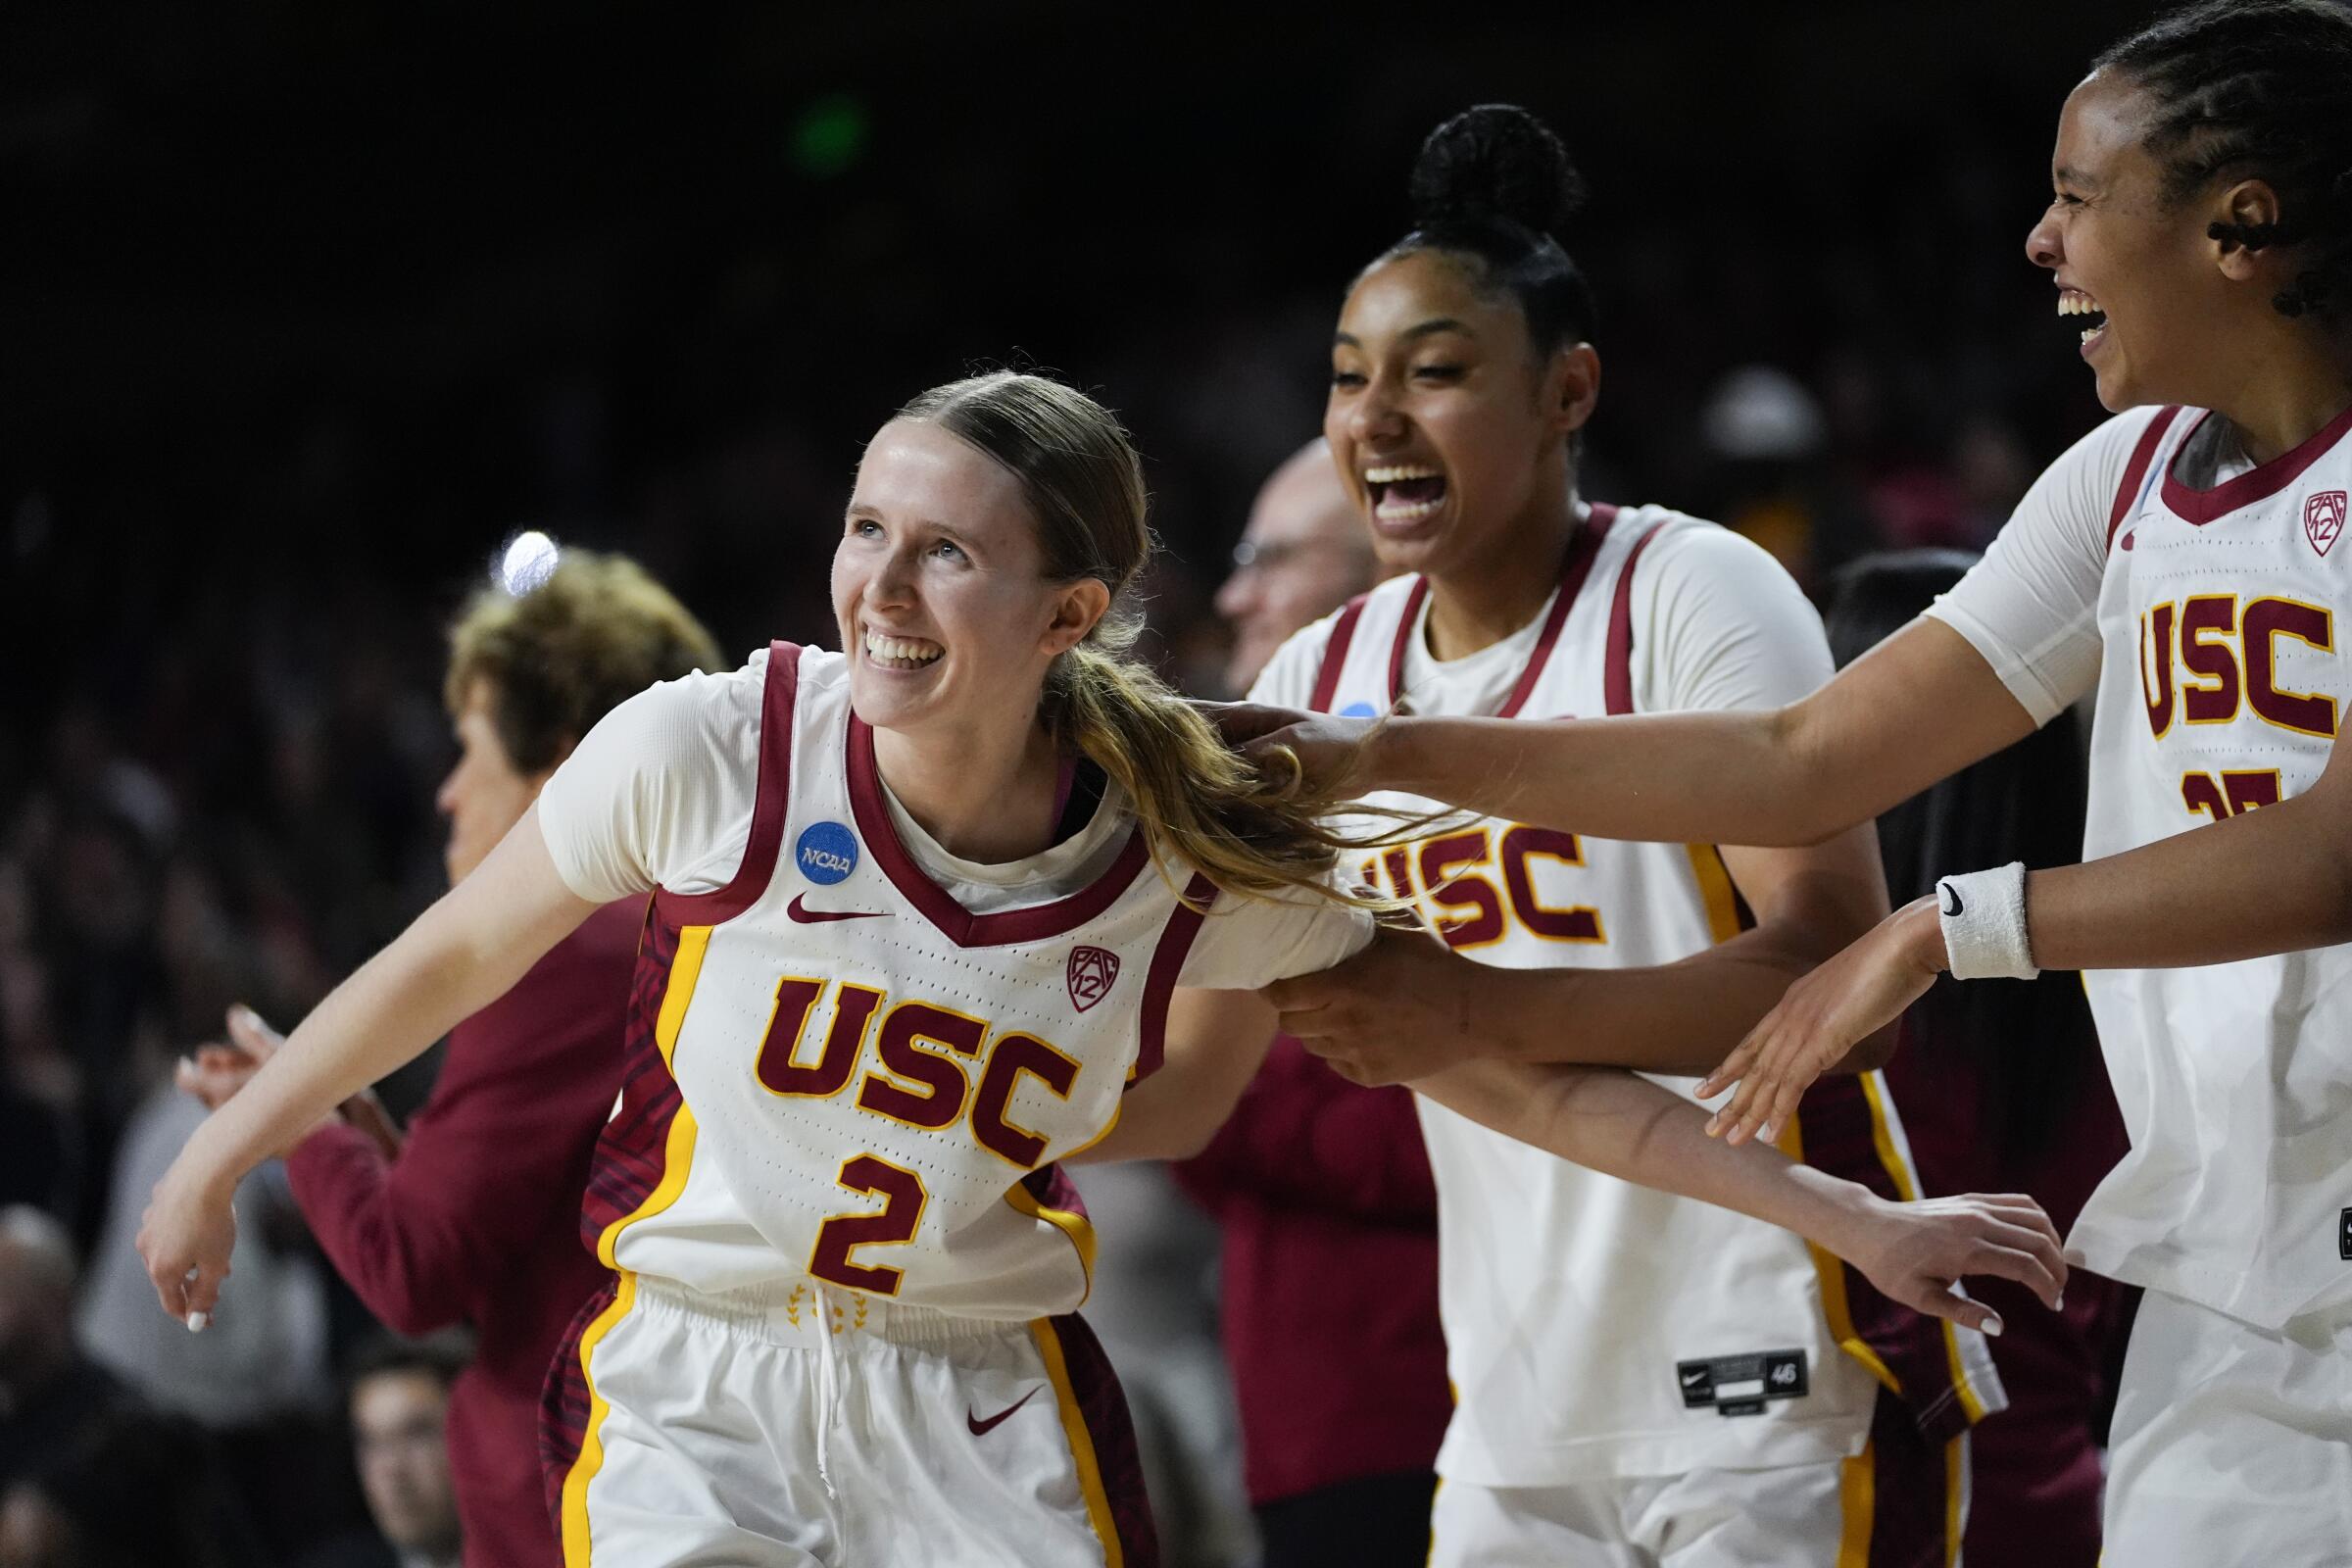 USC guard India Otto, left, celebrates with teammates JuJu Watkins, center, and McKenzie Forbes after scoring on Saturday.